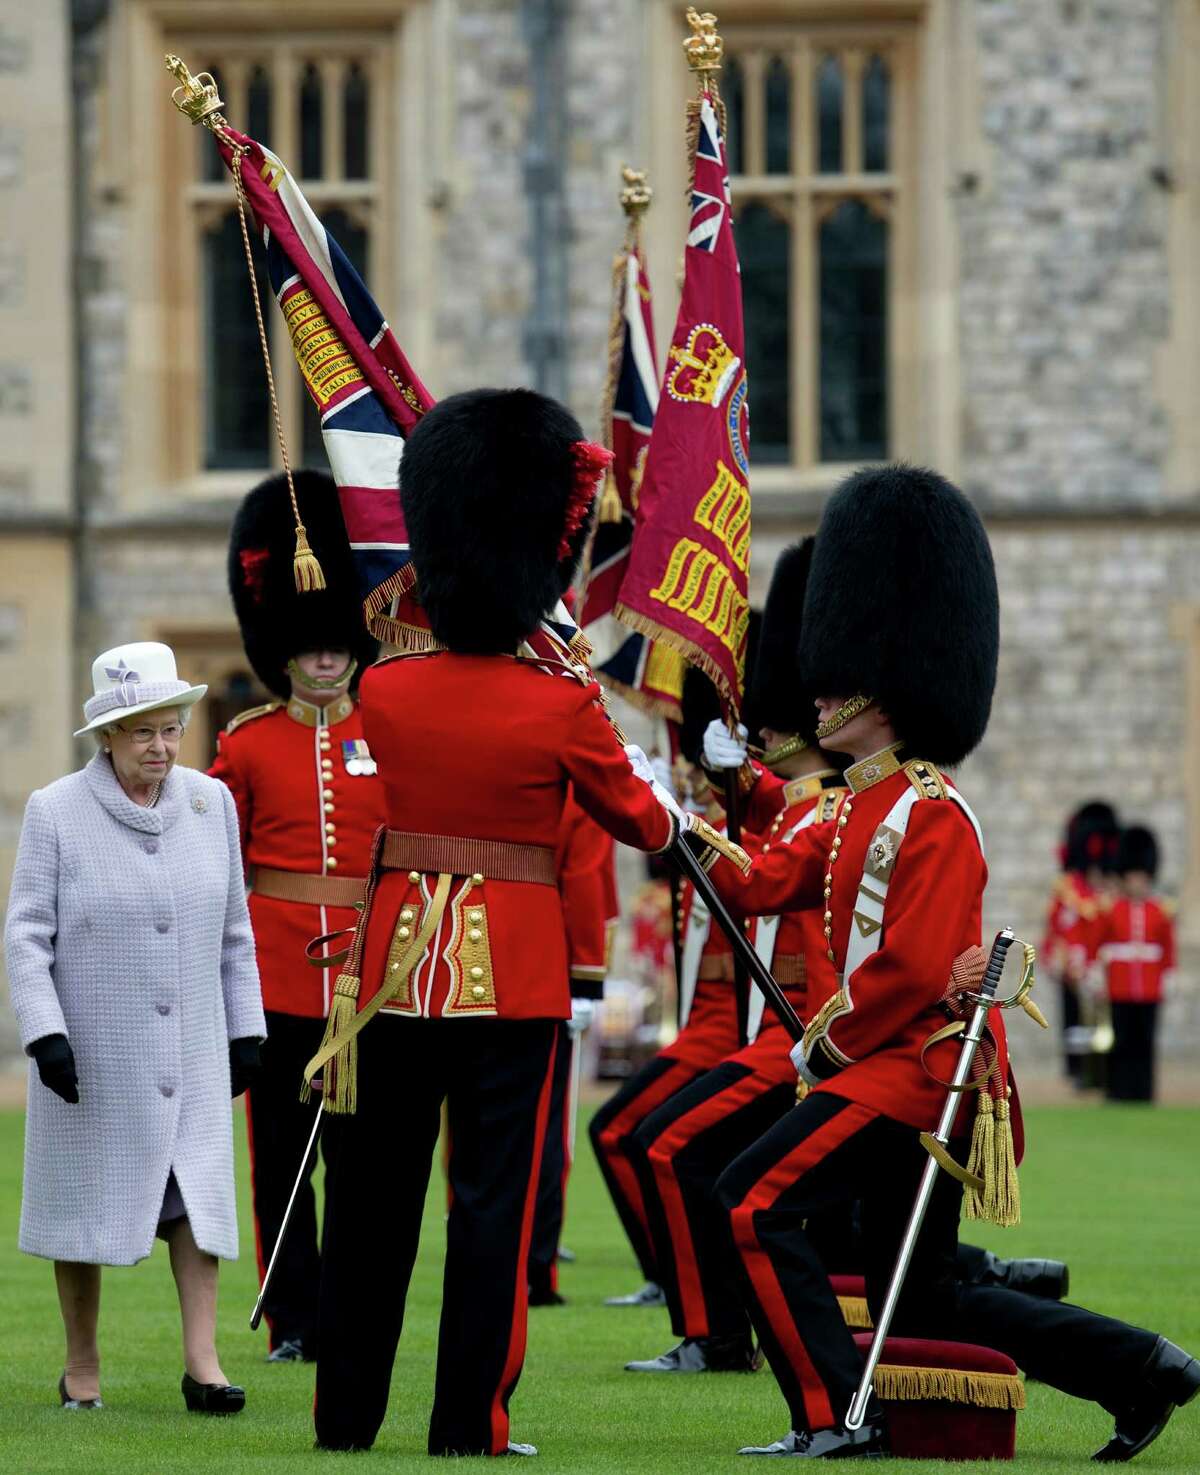 Britain's Queen Elizabeth II (L) presents New Colours to the 1st Battalion and No. 7 Company the Coldstream Guards at Windsor Castle, Berkshire, west of London, on May 3, 2012. The Queen presented New Colours to the 1st Battalion and No. 7 Company of the Coldstream Guards and then inspected the Parade. The Coldstream Guards, the oldest regiment in the British Army, will form part of the guard for Trooping the Colour in honour the the Queen's birthday in June following which the regiment will prepare for deployment to Afghanistan once more. AFP PHOTO / POOL / BEN STANSALLBEN STANSALL/AFP/GettyImages